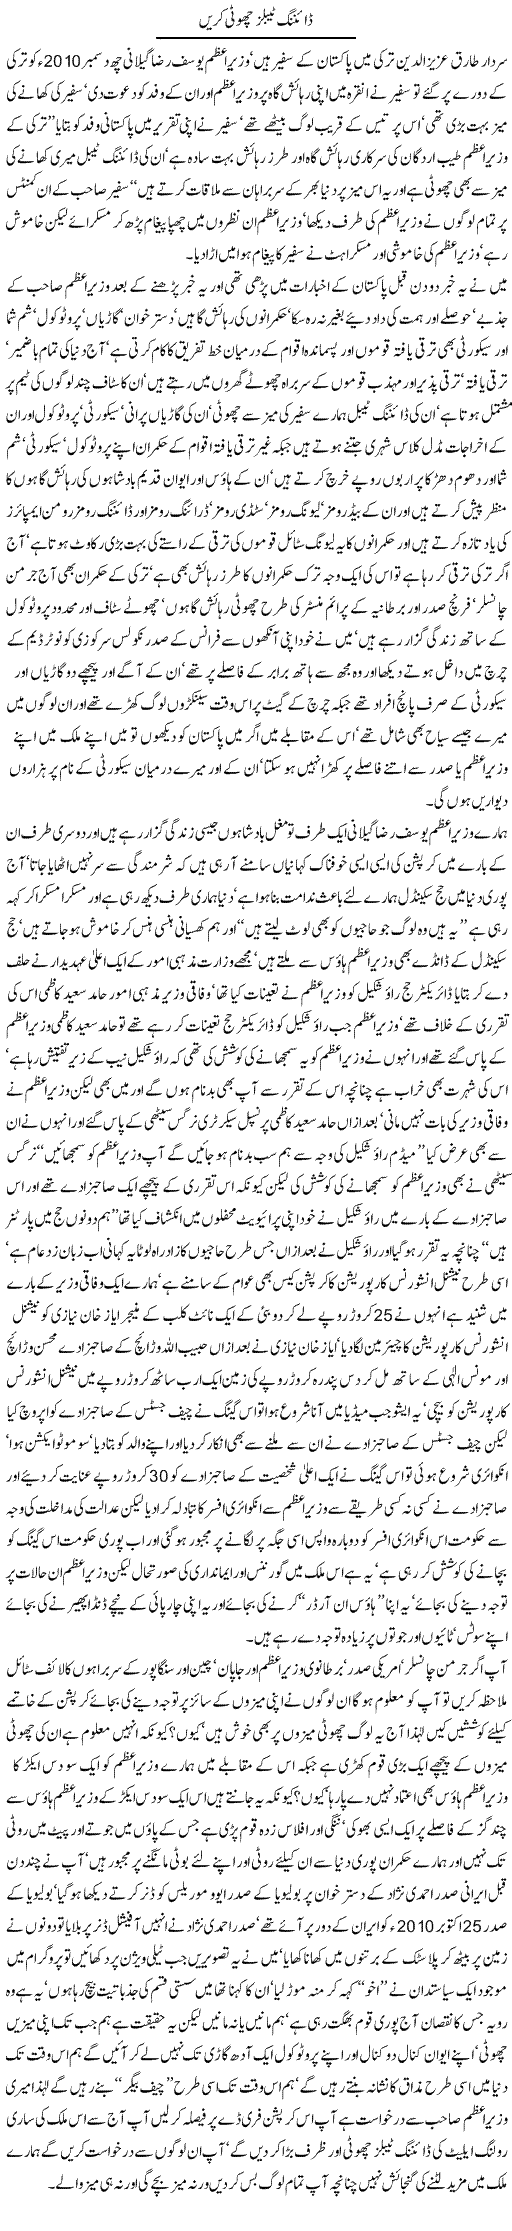 Dinning Tables Express Column Javed Chaudhry 10 December 2010